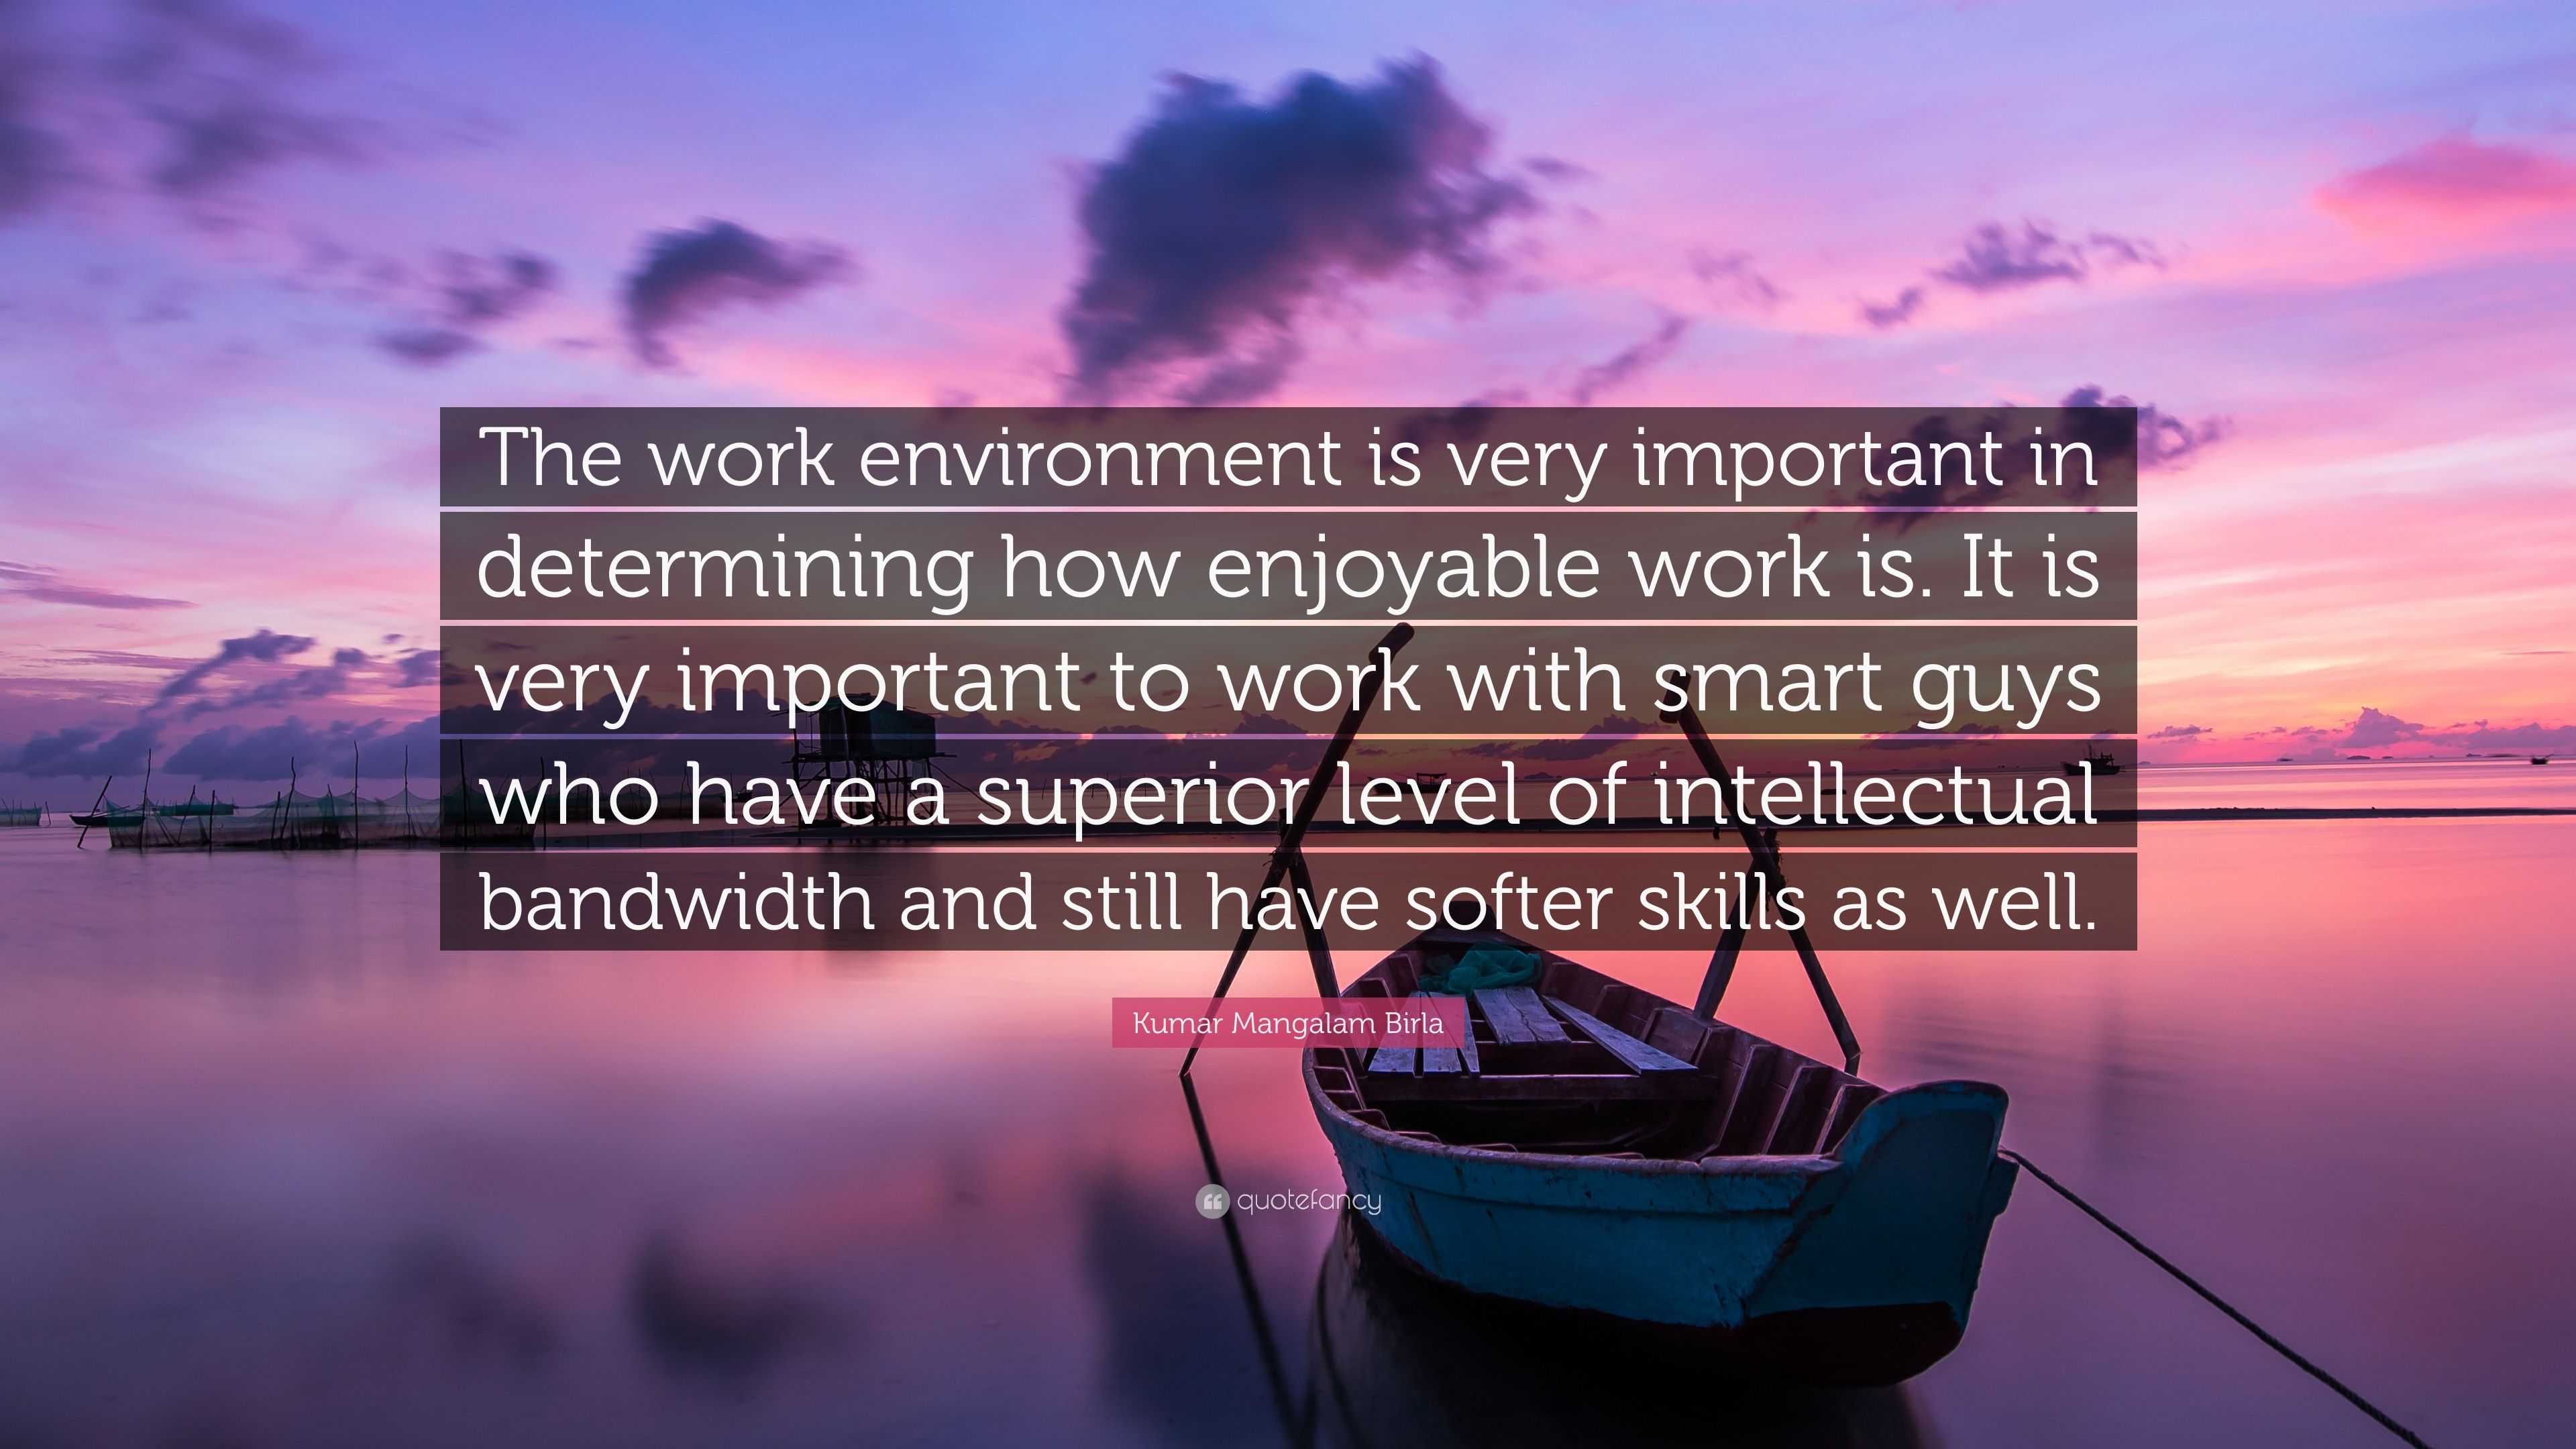 Kumar Mangalam Birla Quote: “The work environment is very important in